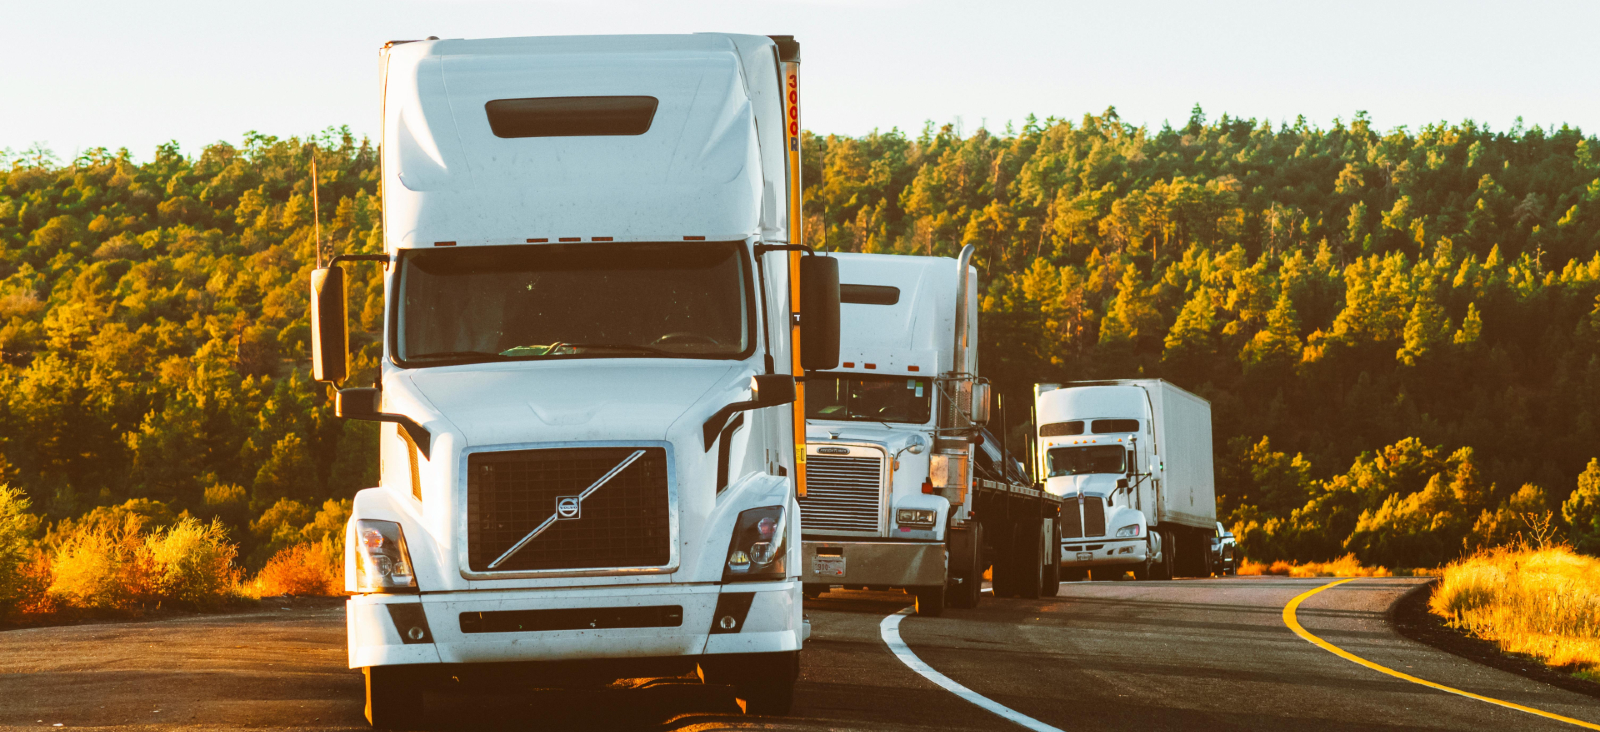 Who Can Be Held Liable in a Truck Accident?